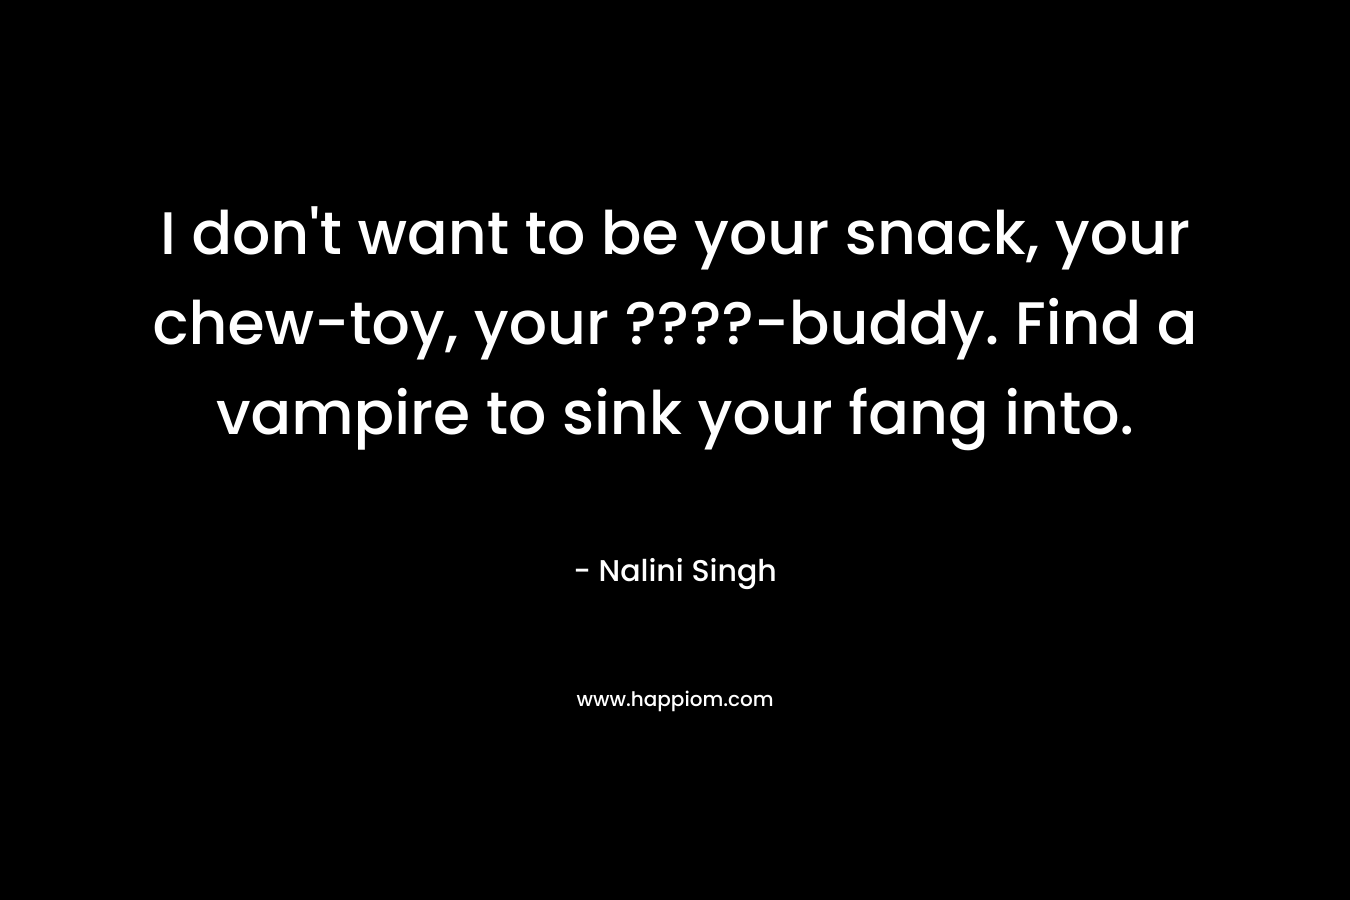 I don’t want to be your snack, your chew-toy, your ????-buddy. Find a vampire to sink your fang into. – Nalini Singh